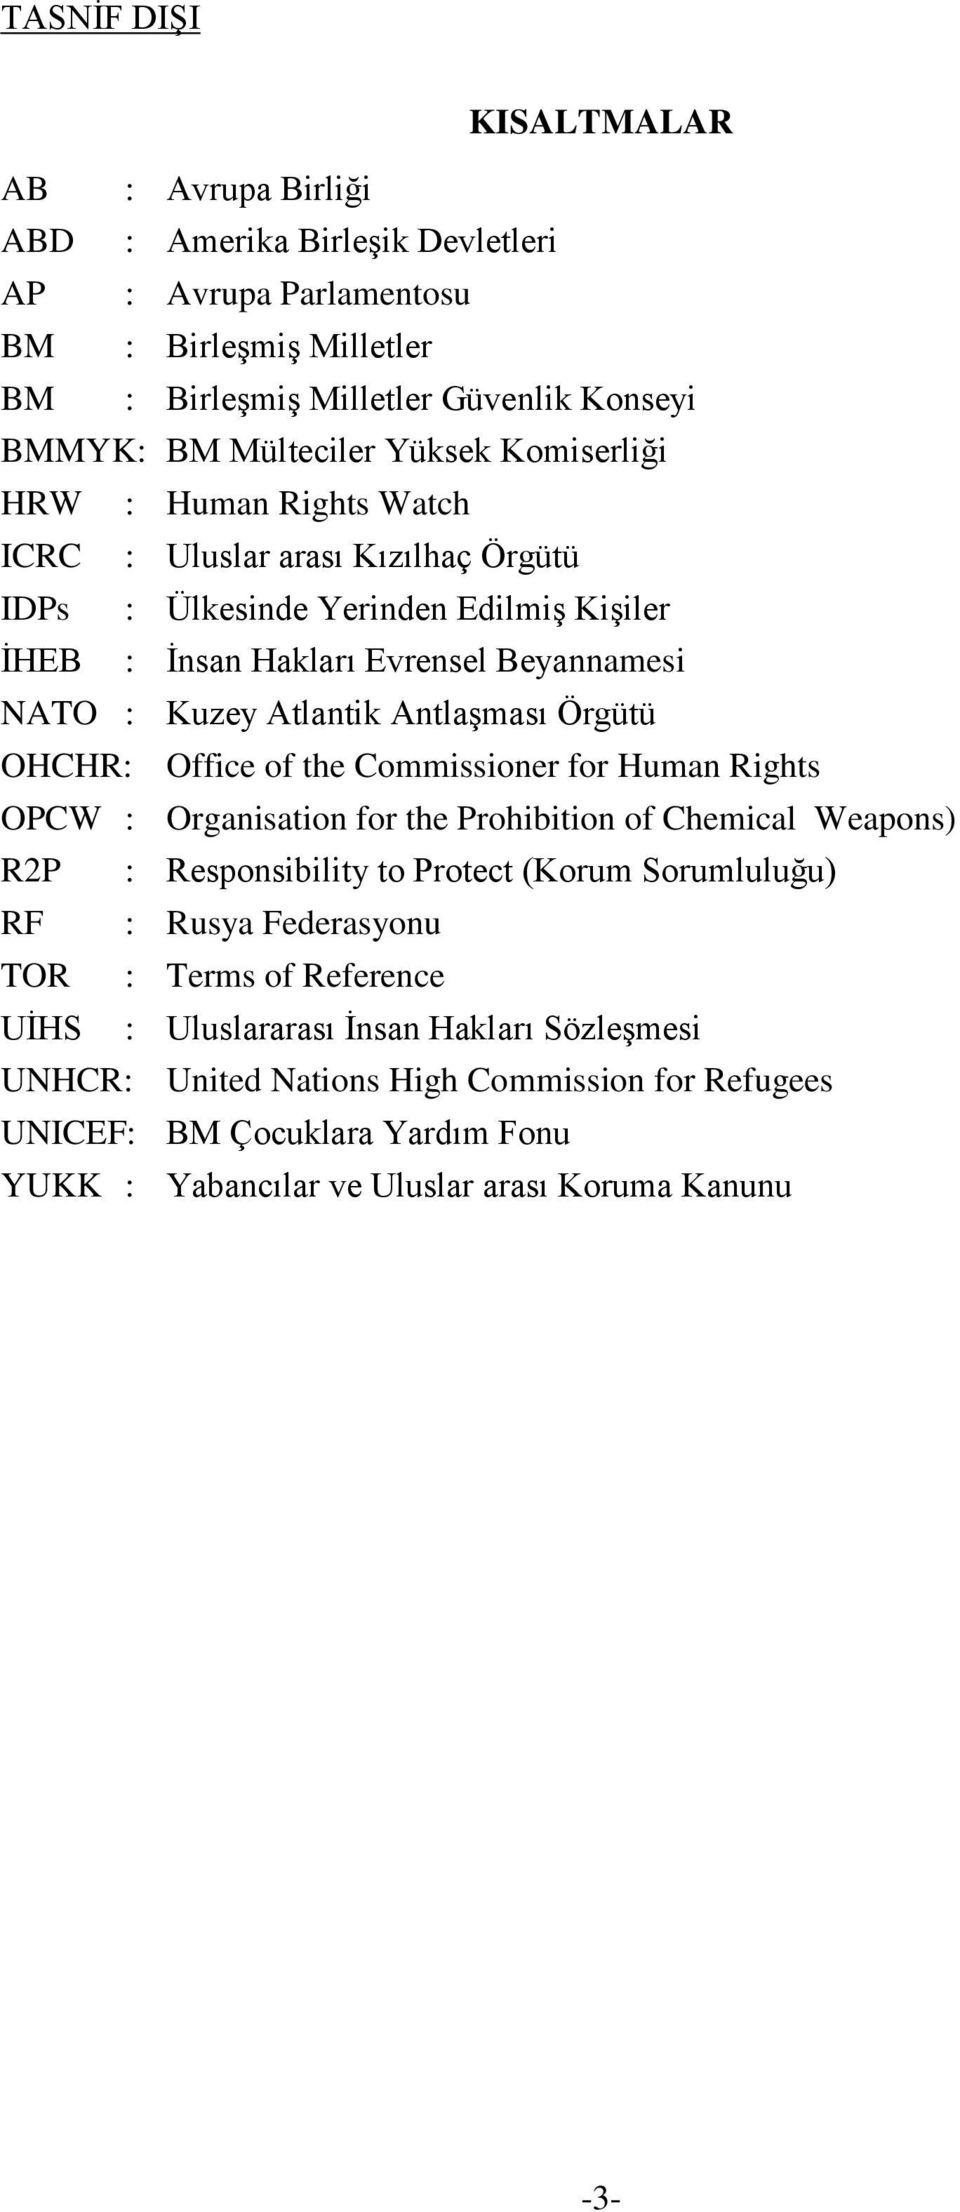 Örgütü OHCHR: Office of the Commissioner for Human Rights OPCW : Organisation for the Prohibition of Chemical Weapons) R2P : Responsibility to Protect (Korum Sorumluluğu) RF : Rusya Federasyonu